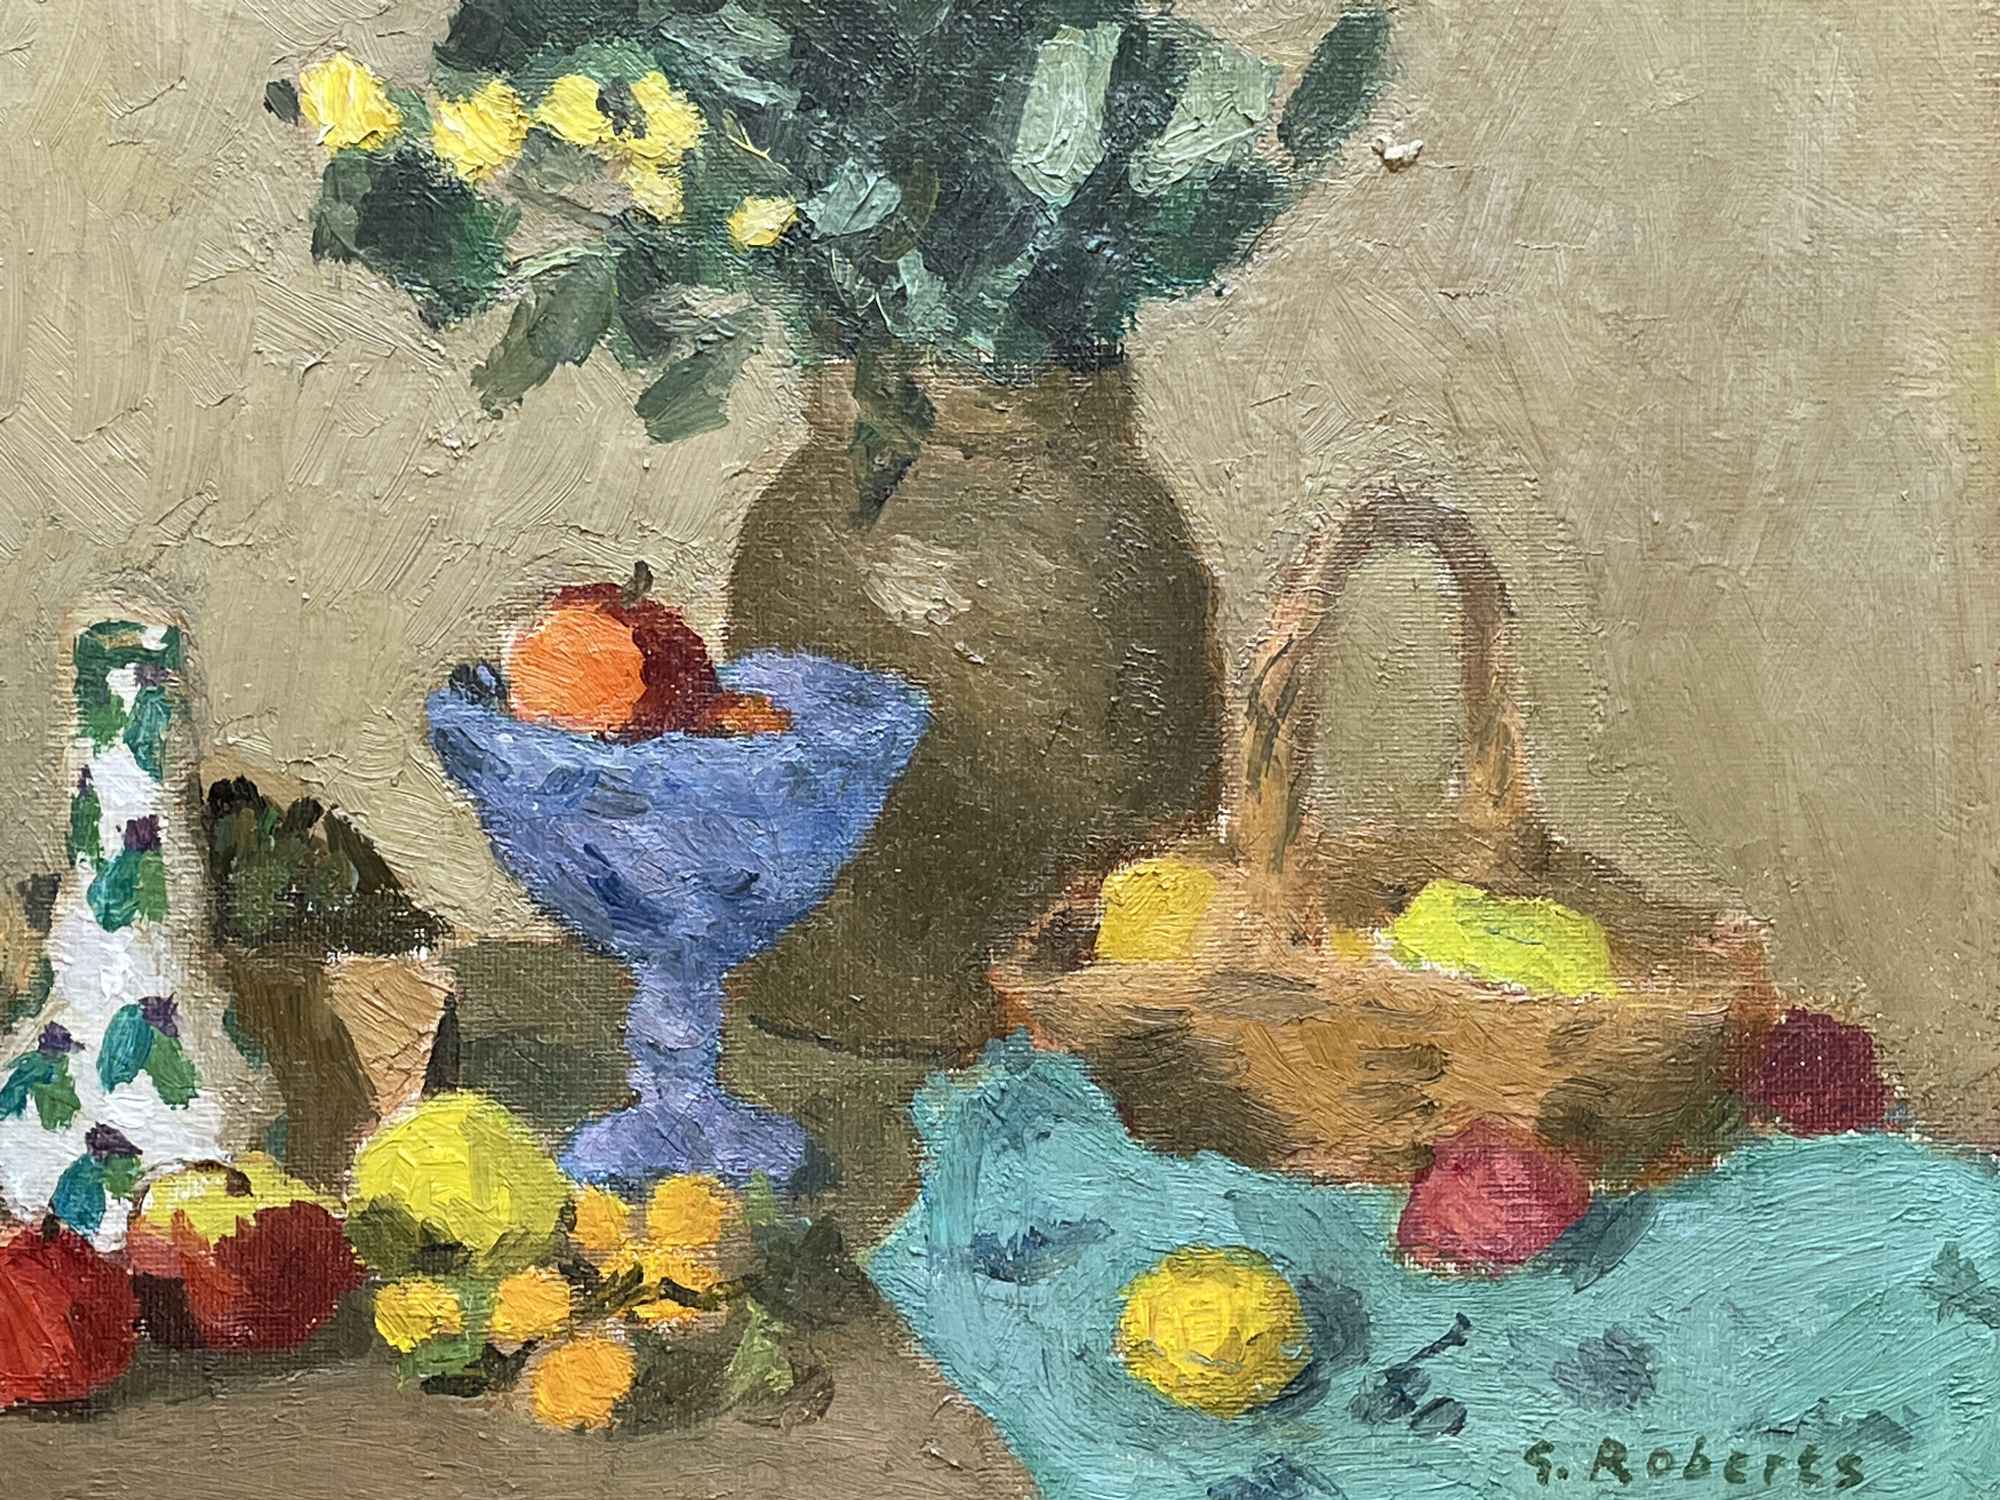 Still life with Fruit and Flowers